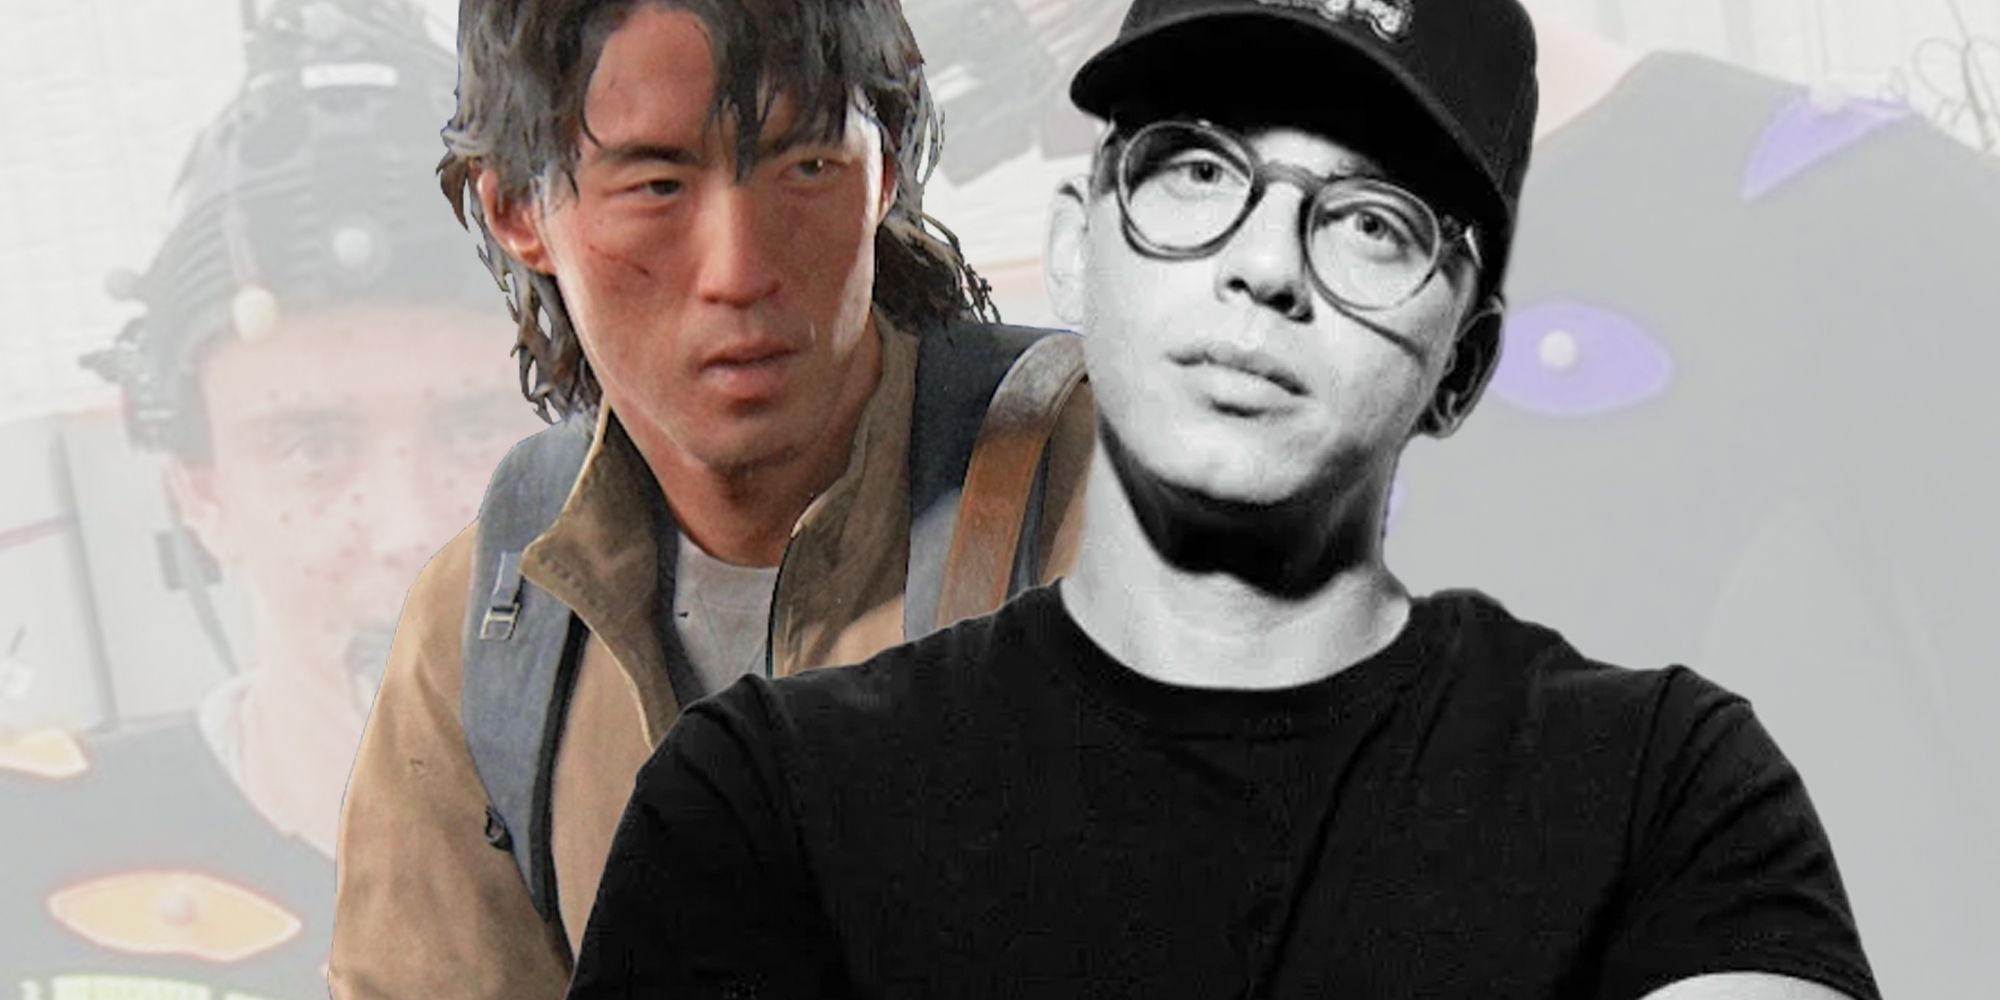 Logic and Jesse from The Last of Us Part 2 side by side